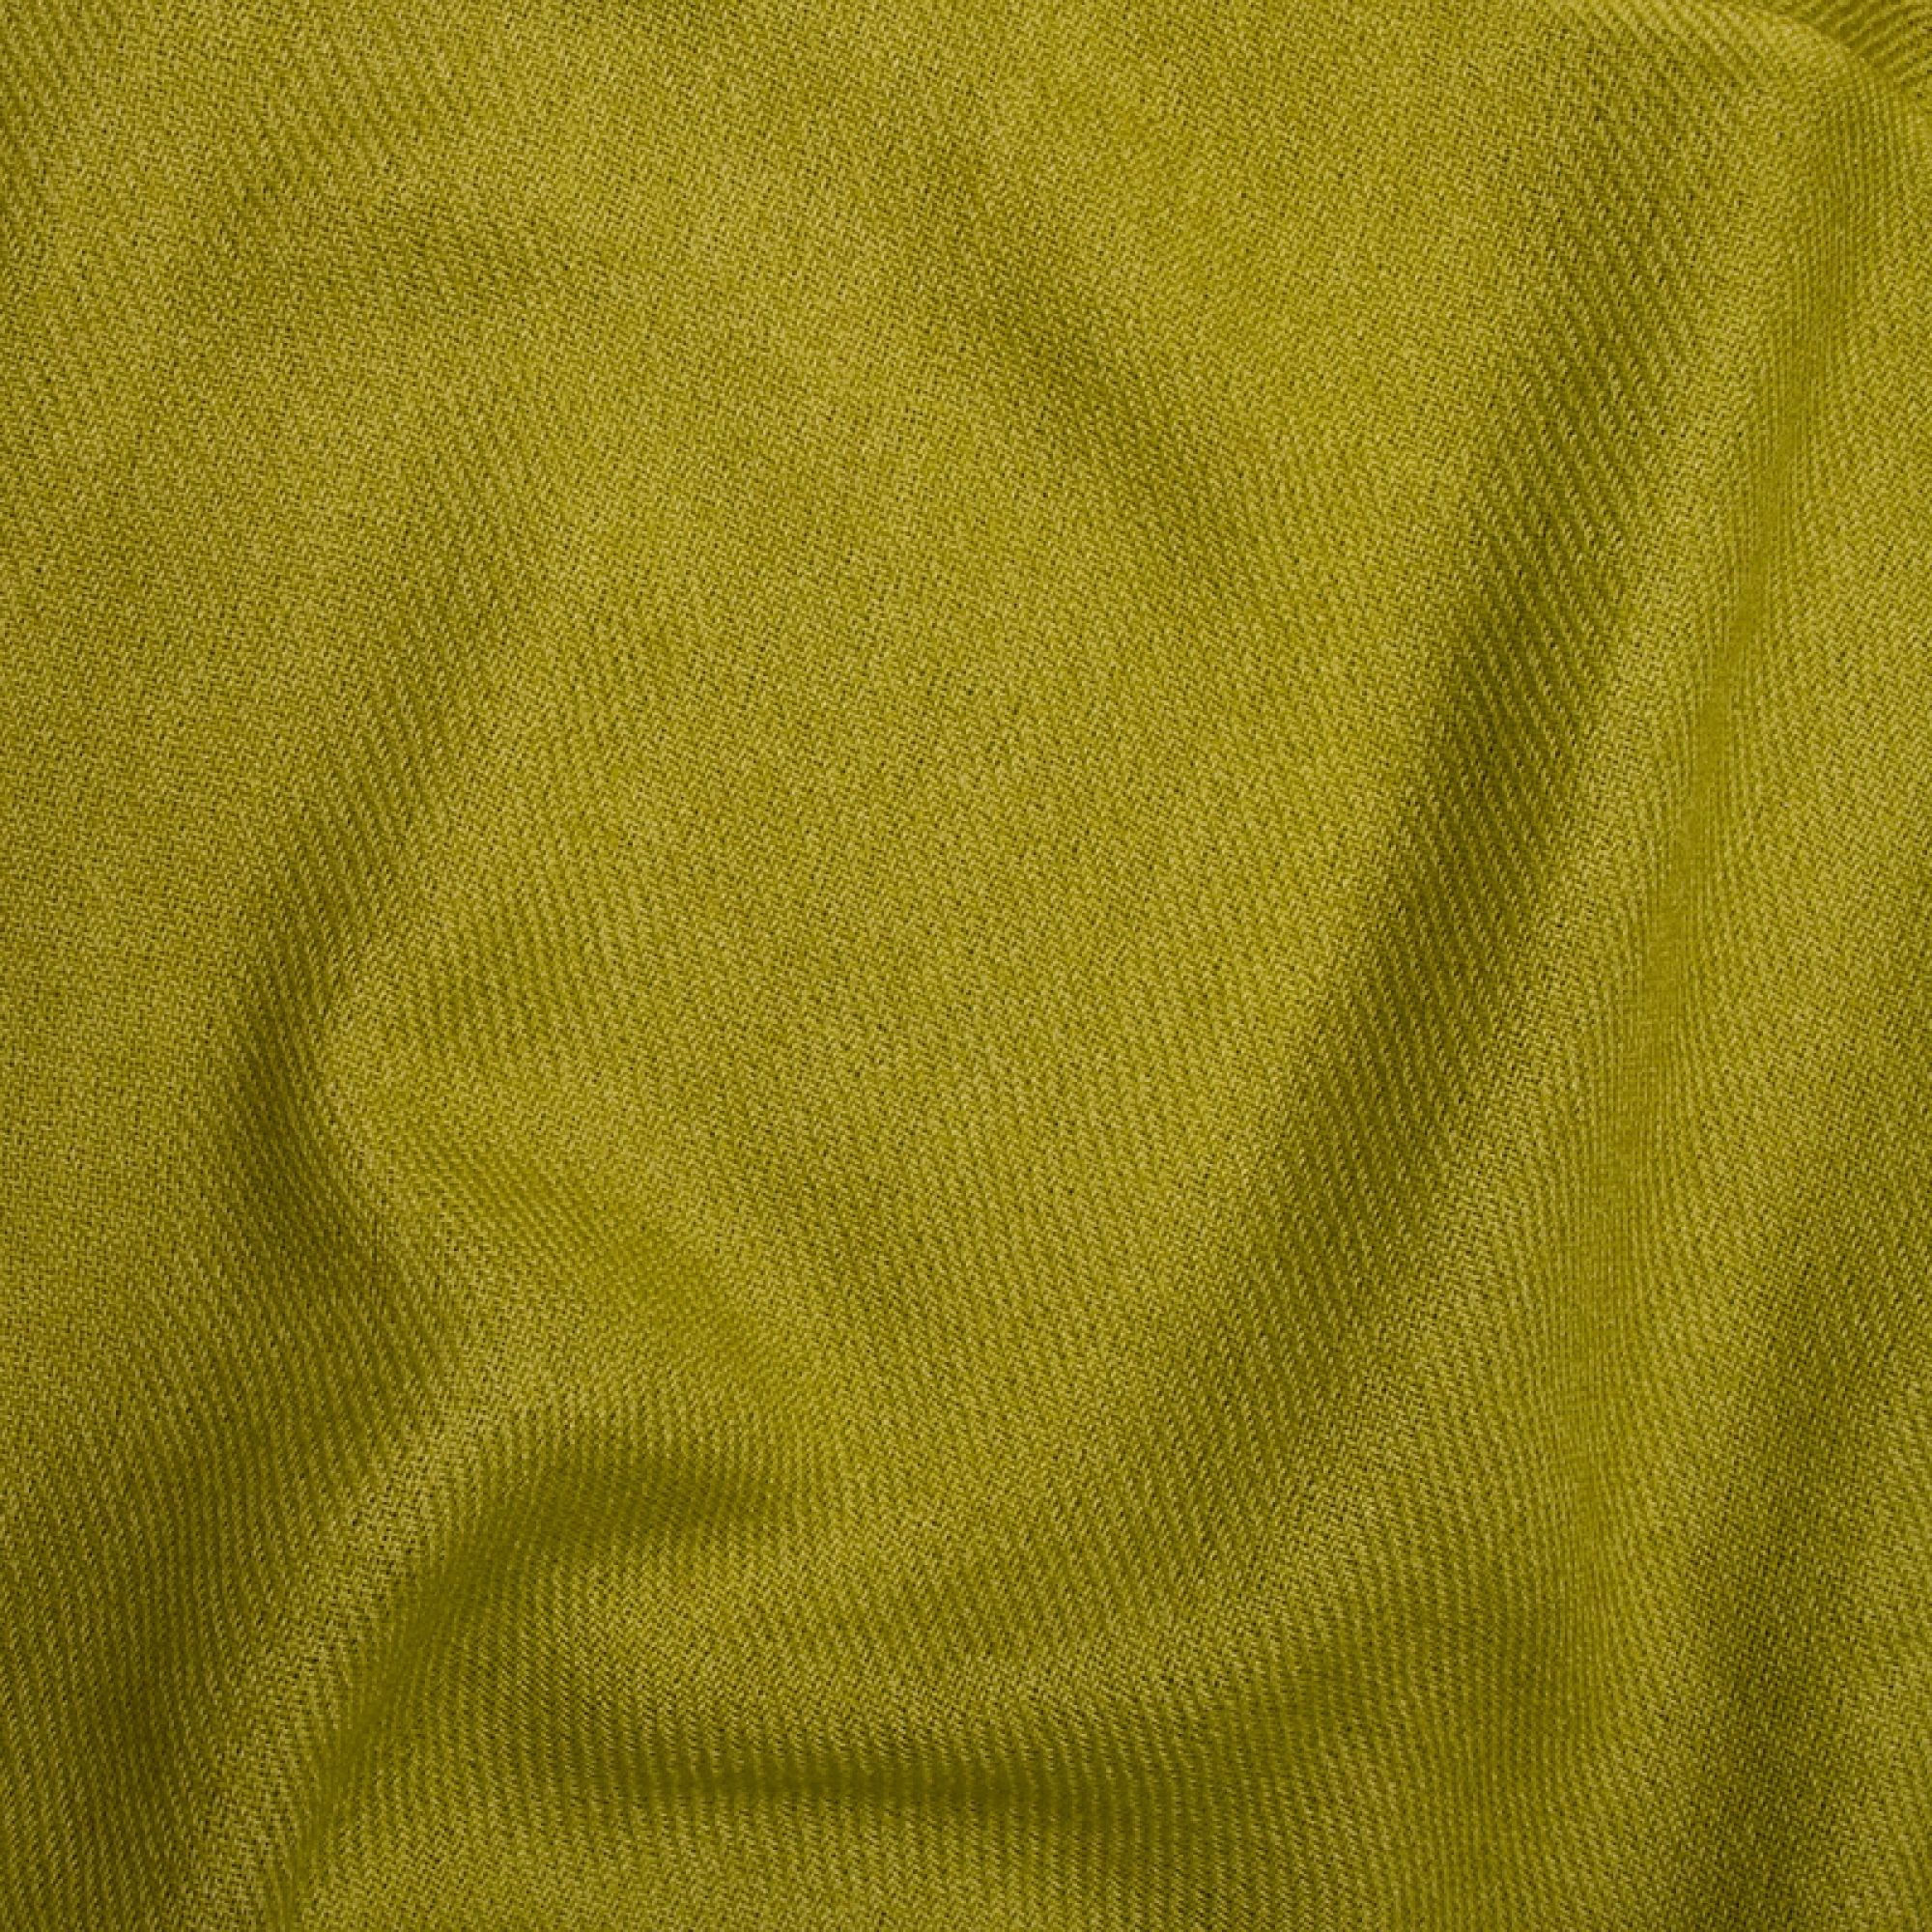 Cashmere accessories blanket toodoo plain s 140 x 200 lime punch 140 x 200 cm